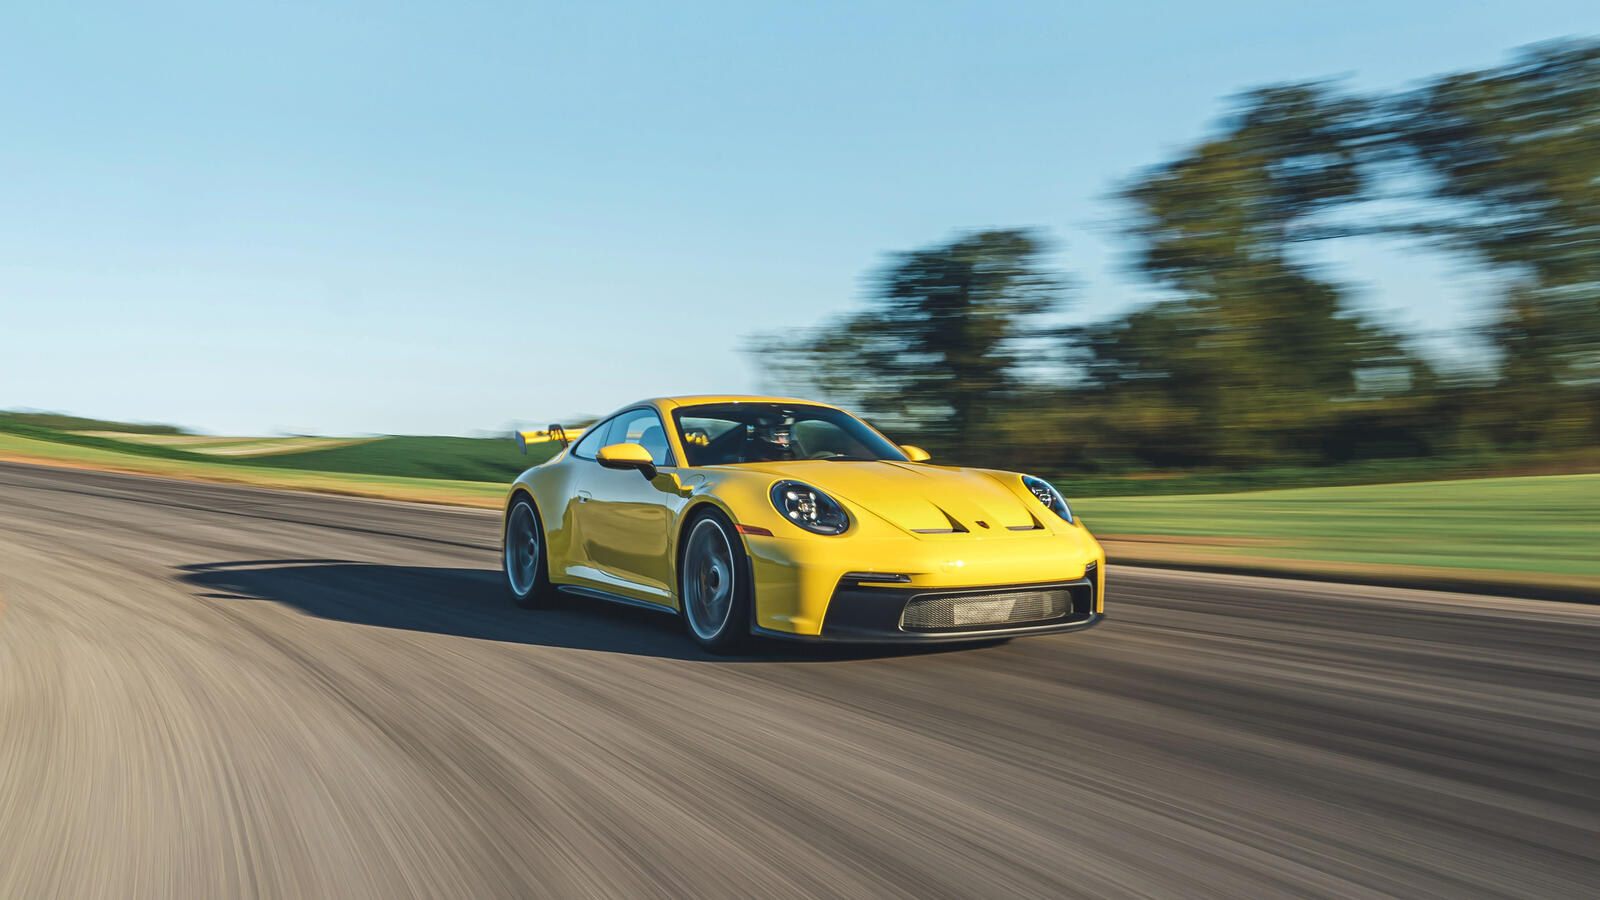 Free photo A bright yellow Porsche 911 rushes down the road